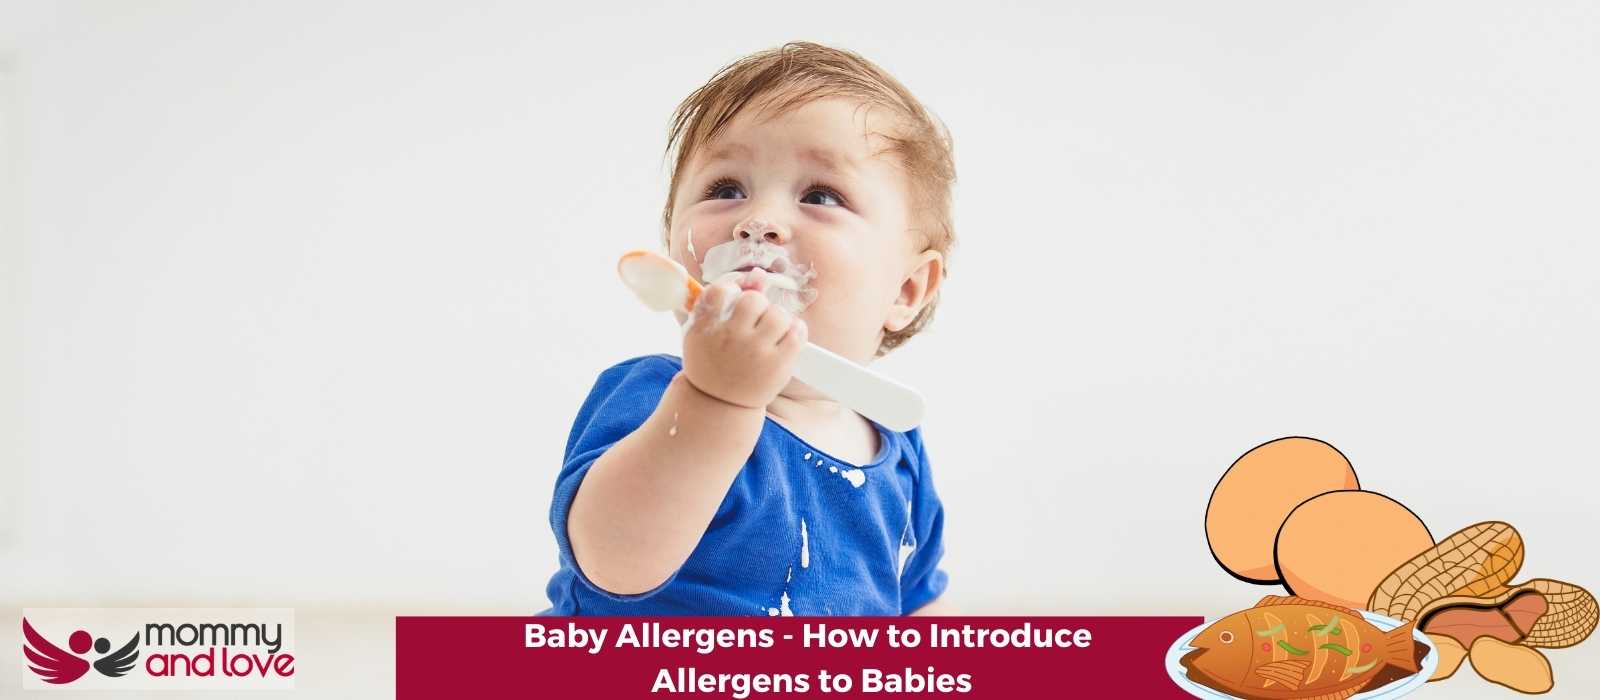 Baby Allergens - How to Introduce Allergens to Babies